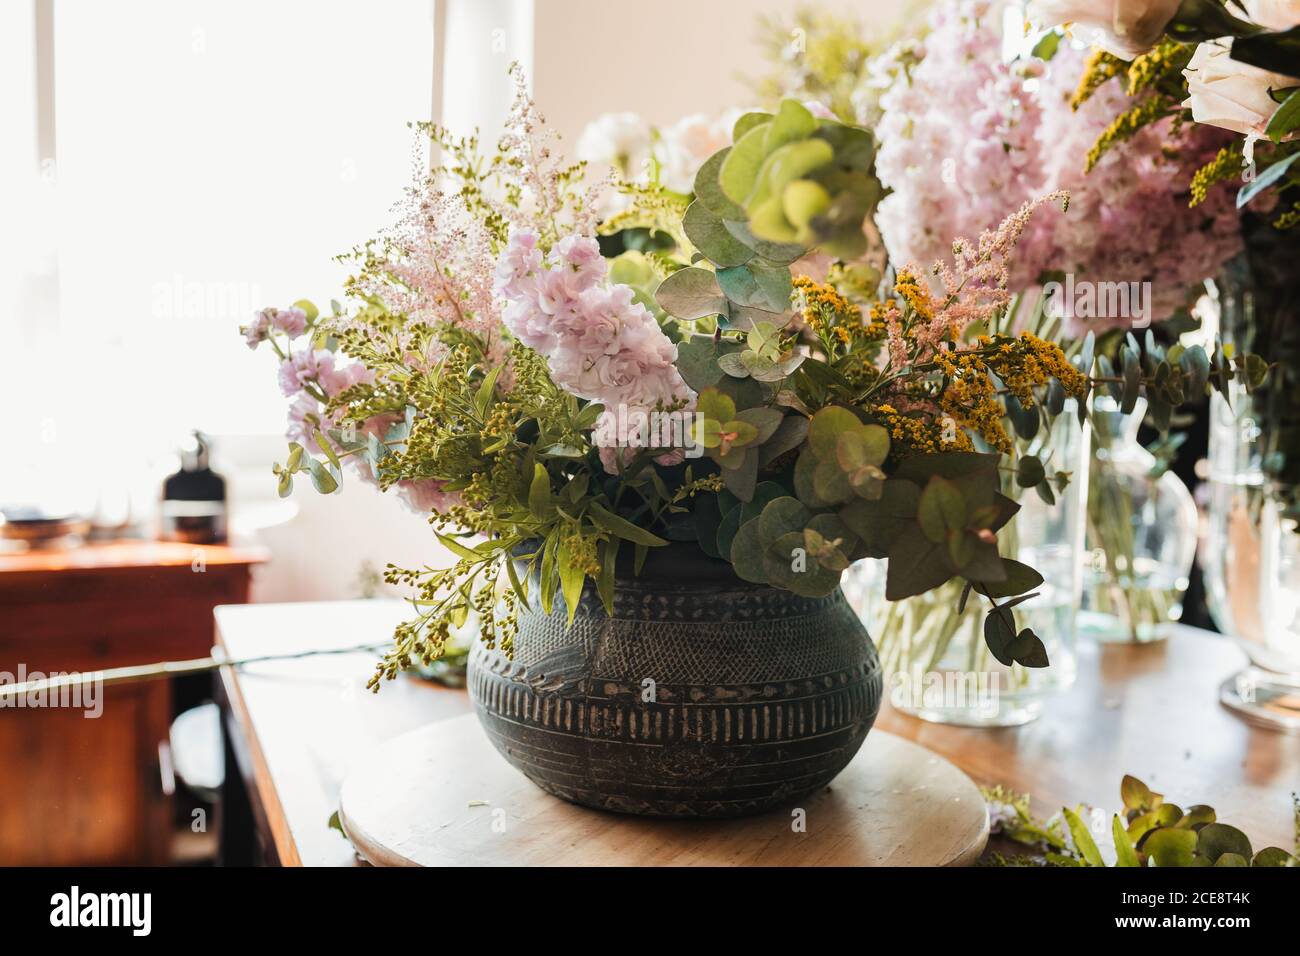 Beautiful bouquet with various flowers including craspedia flowers with green eucalyptus branches arranged in ornamental ceramic pot placed on table in creative floristry studio Stock Photo